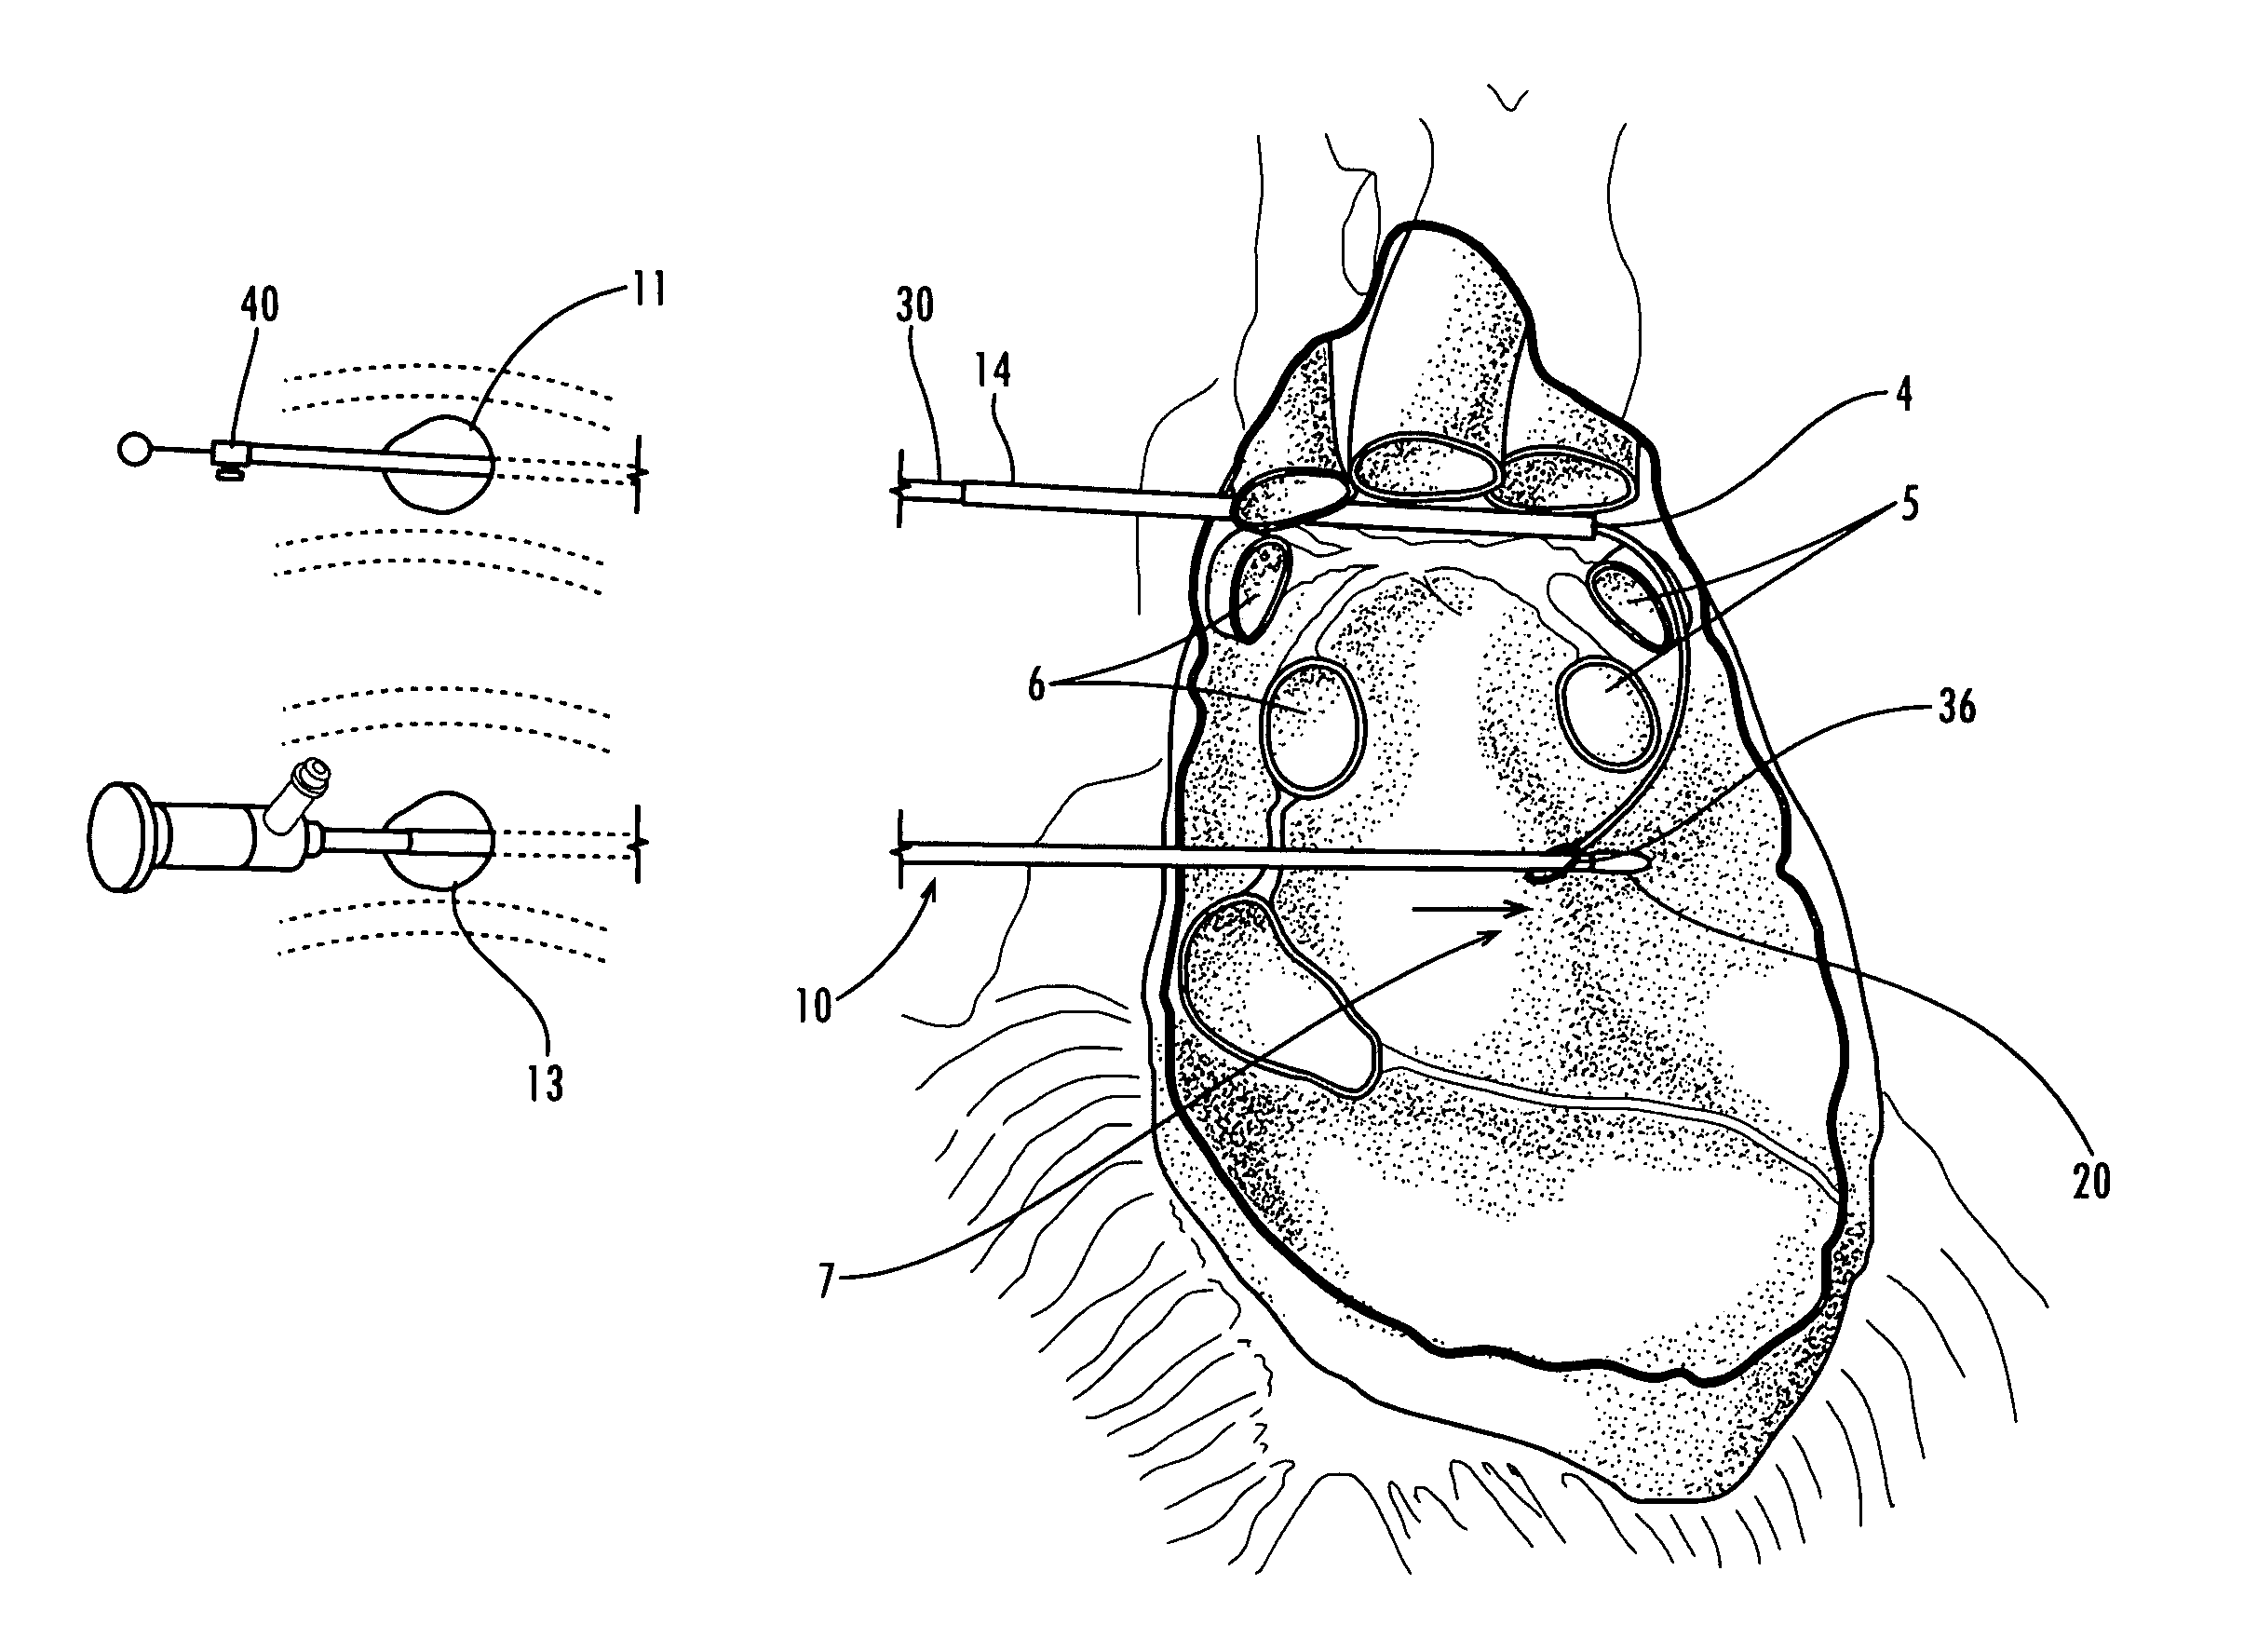 Apparatus and methods for performing ablation